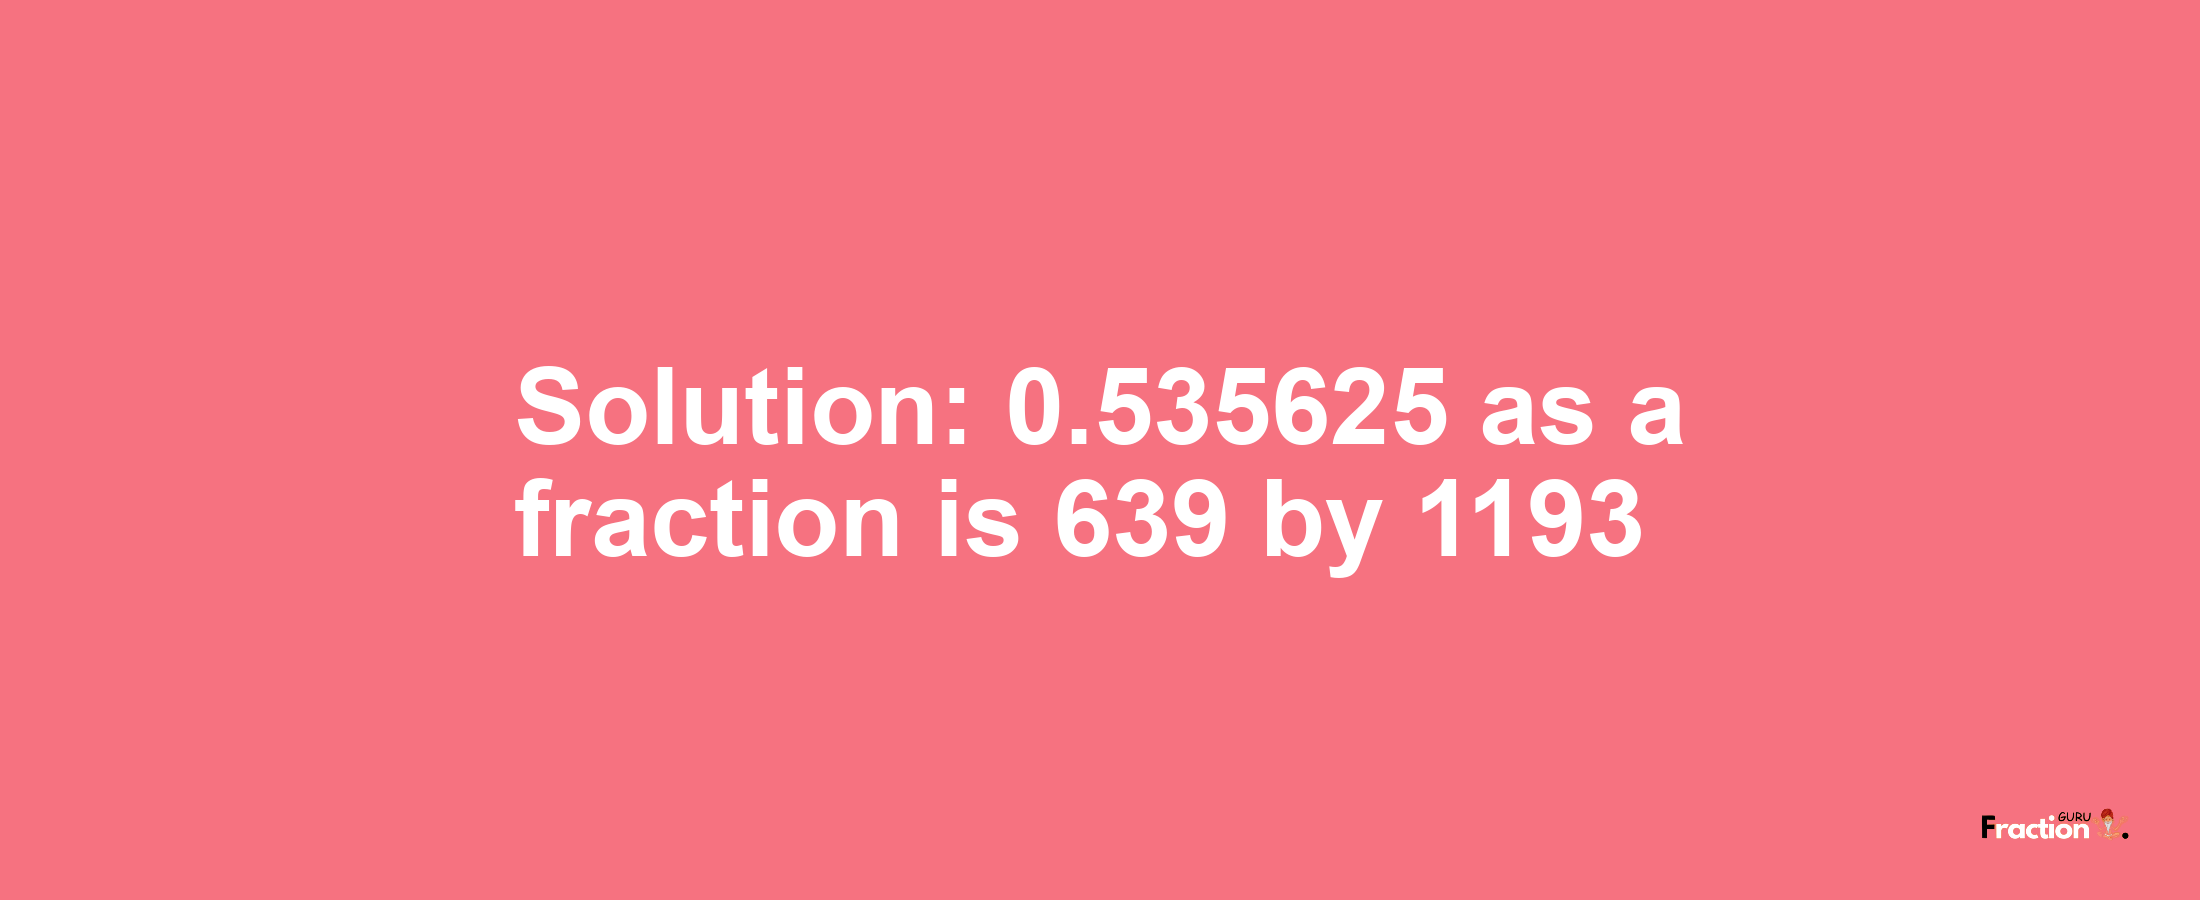 Solution:0.535625 as a fraction is 639/1193